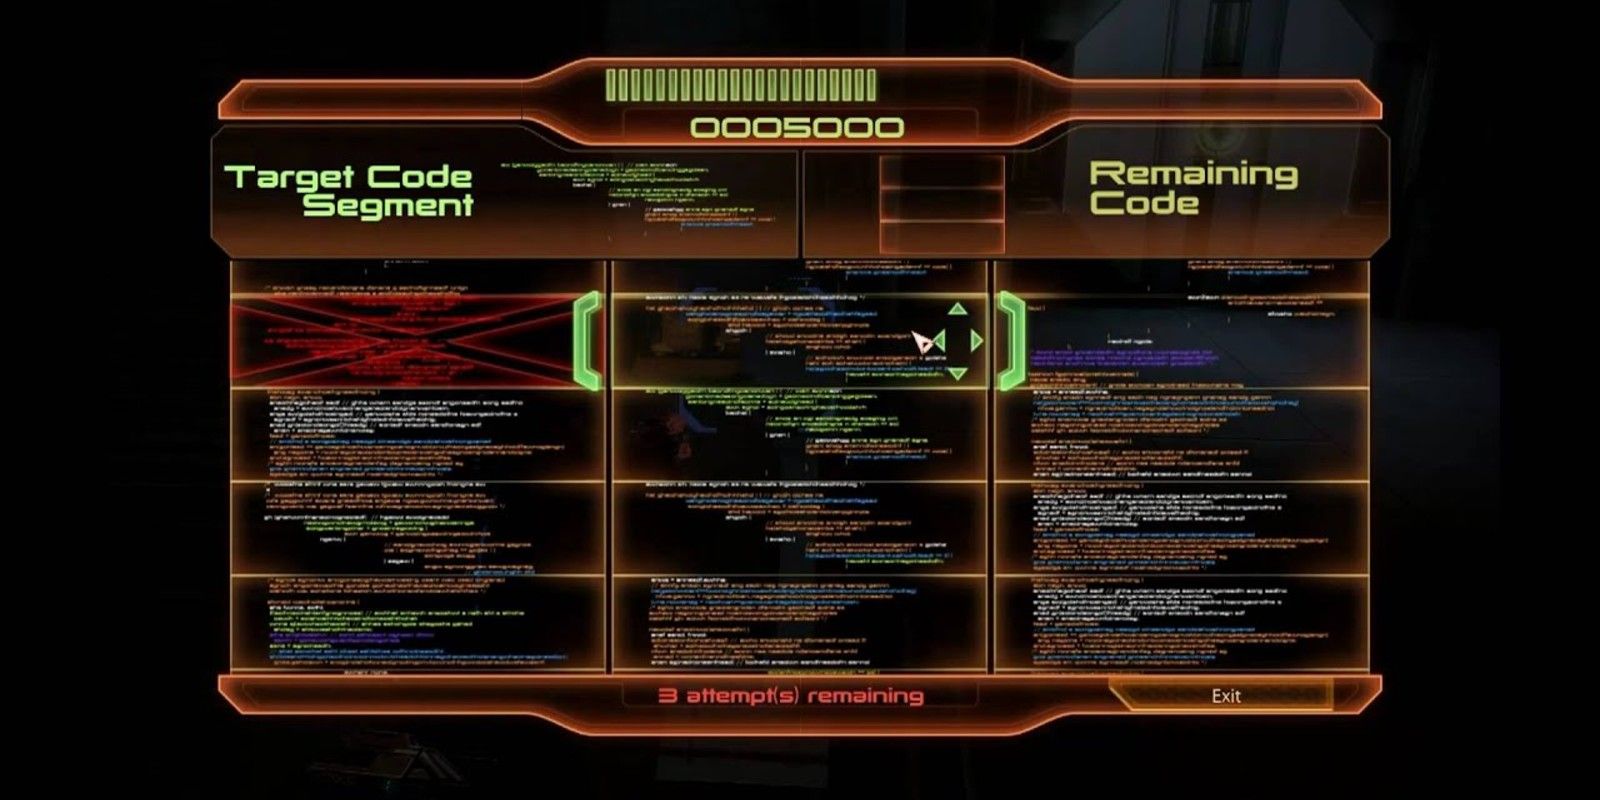 The Hacking system for Datapads & Computers in Mass Effect 2